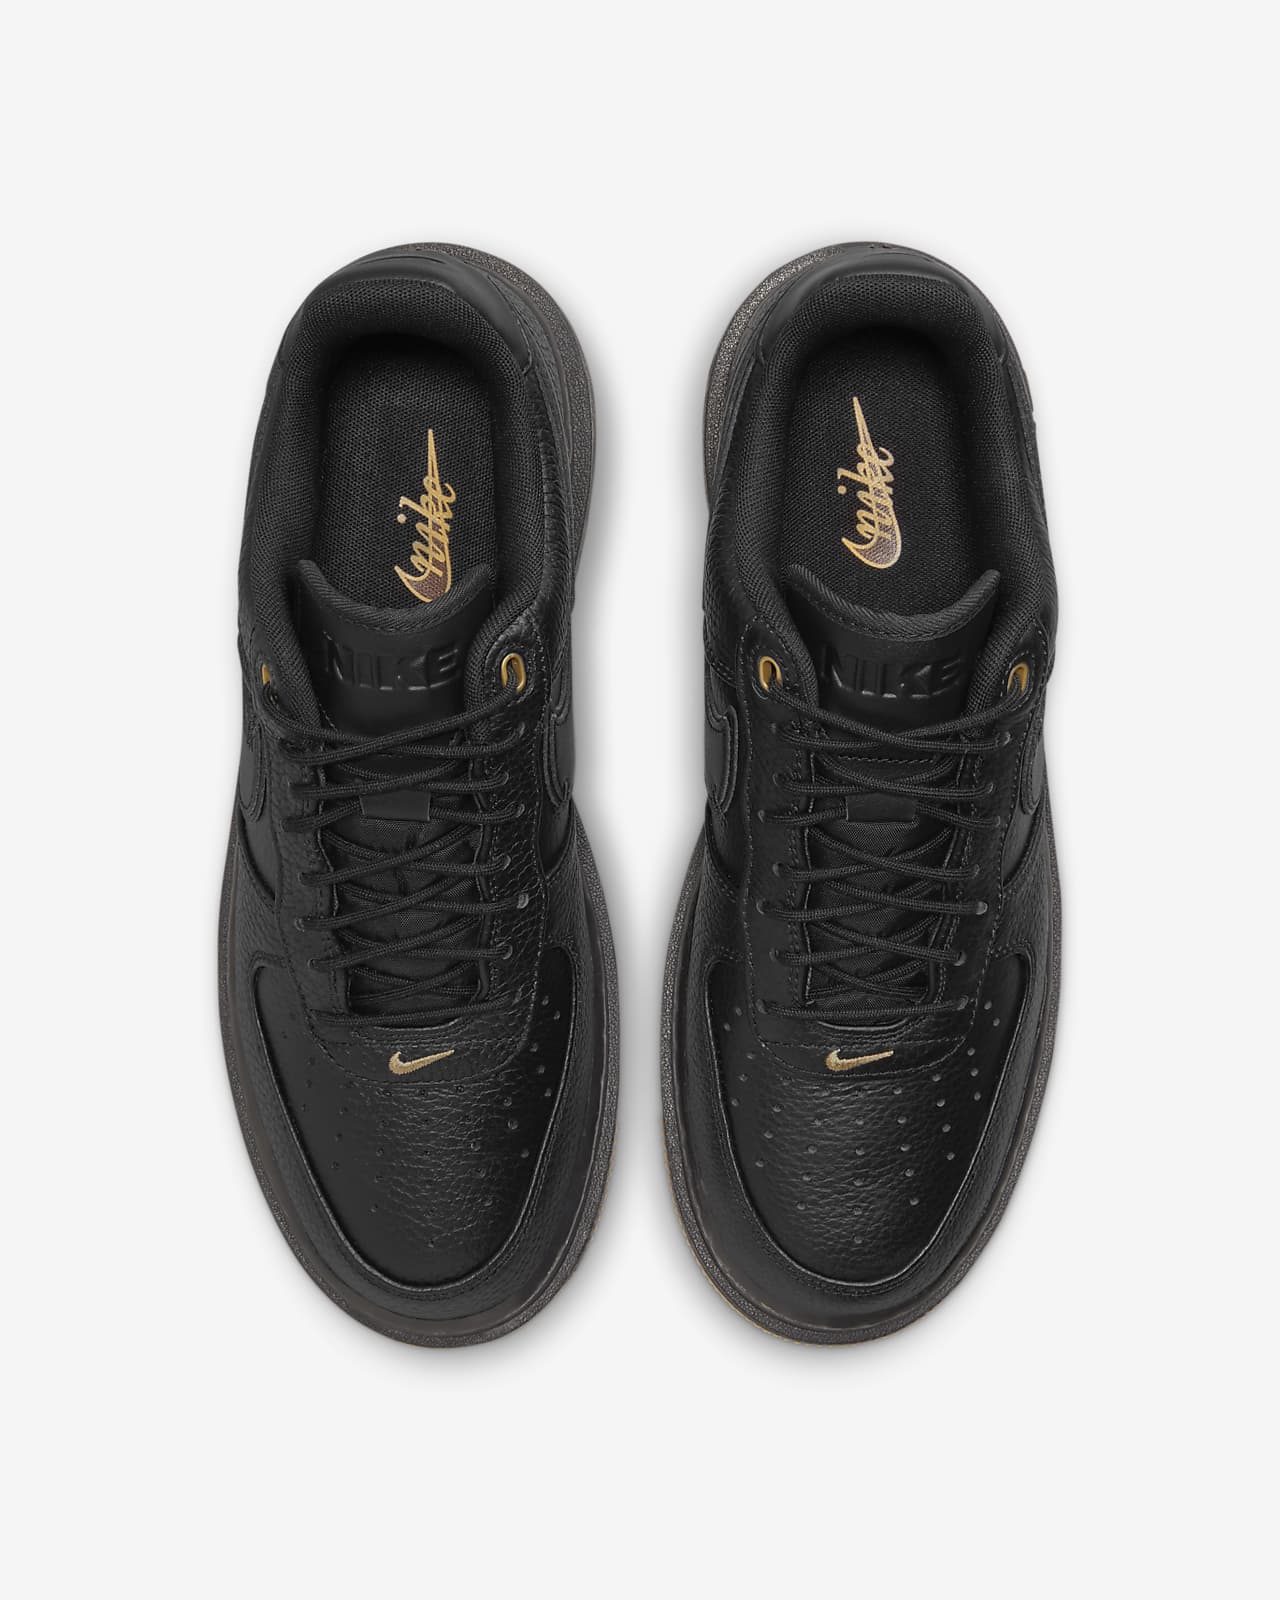 NIKE AIR FORCE 1 LUXE 25.0 ナイキ エアフォースワン